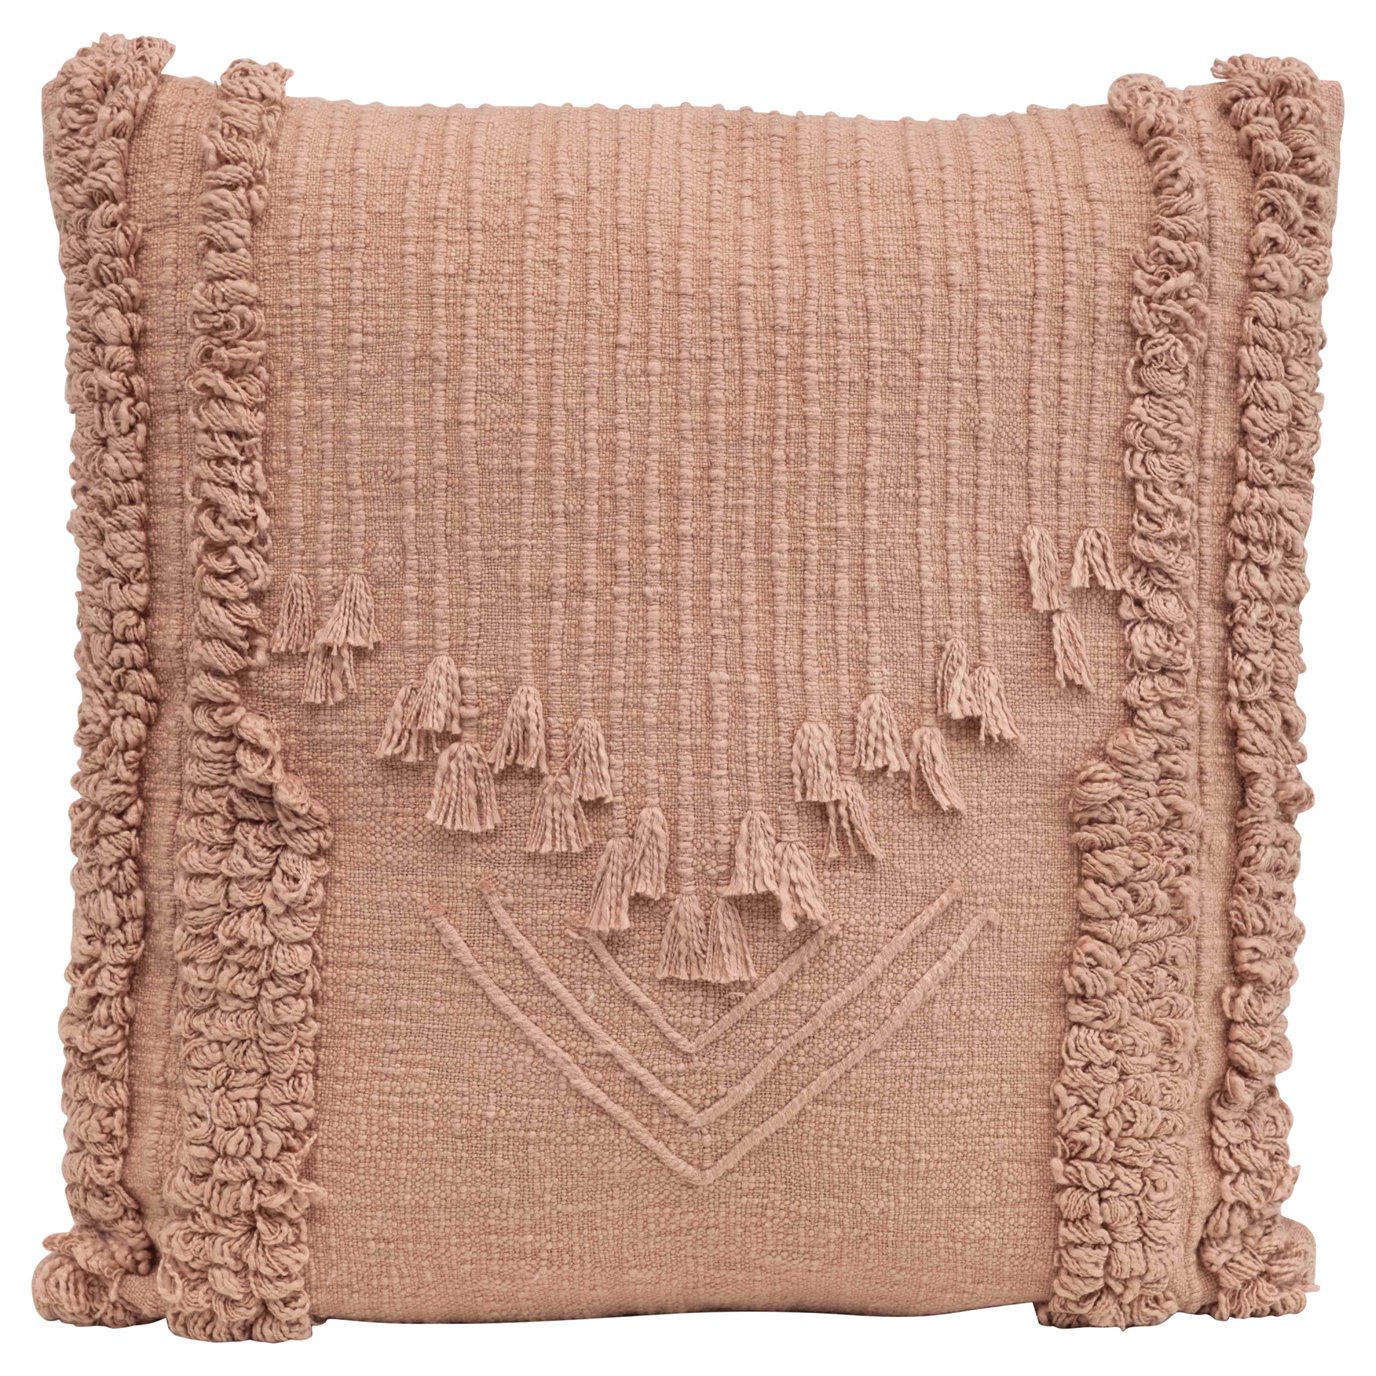 Square Cotton Embroidered Pillow with Looped Stripes & Decorative Front Tassels